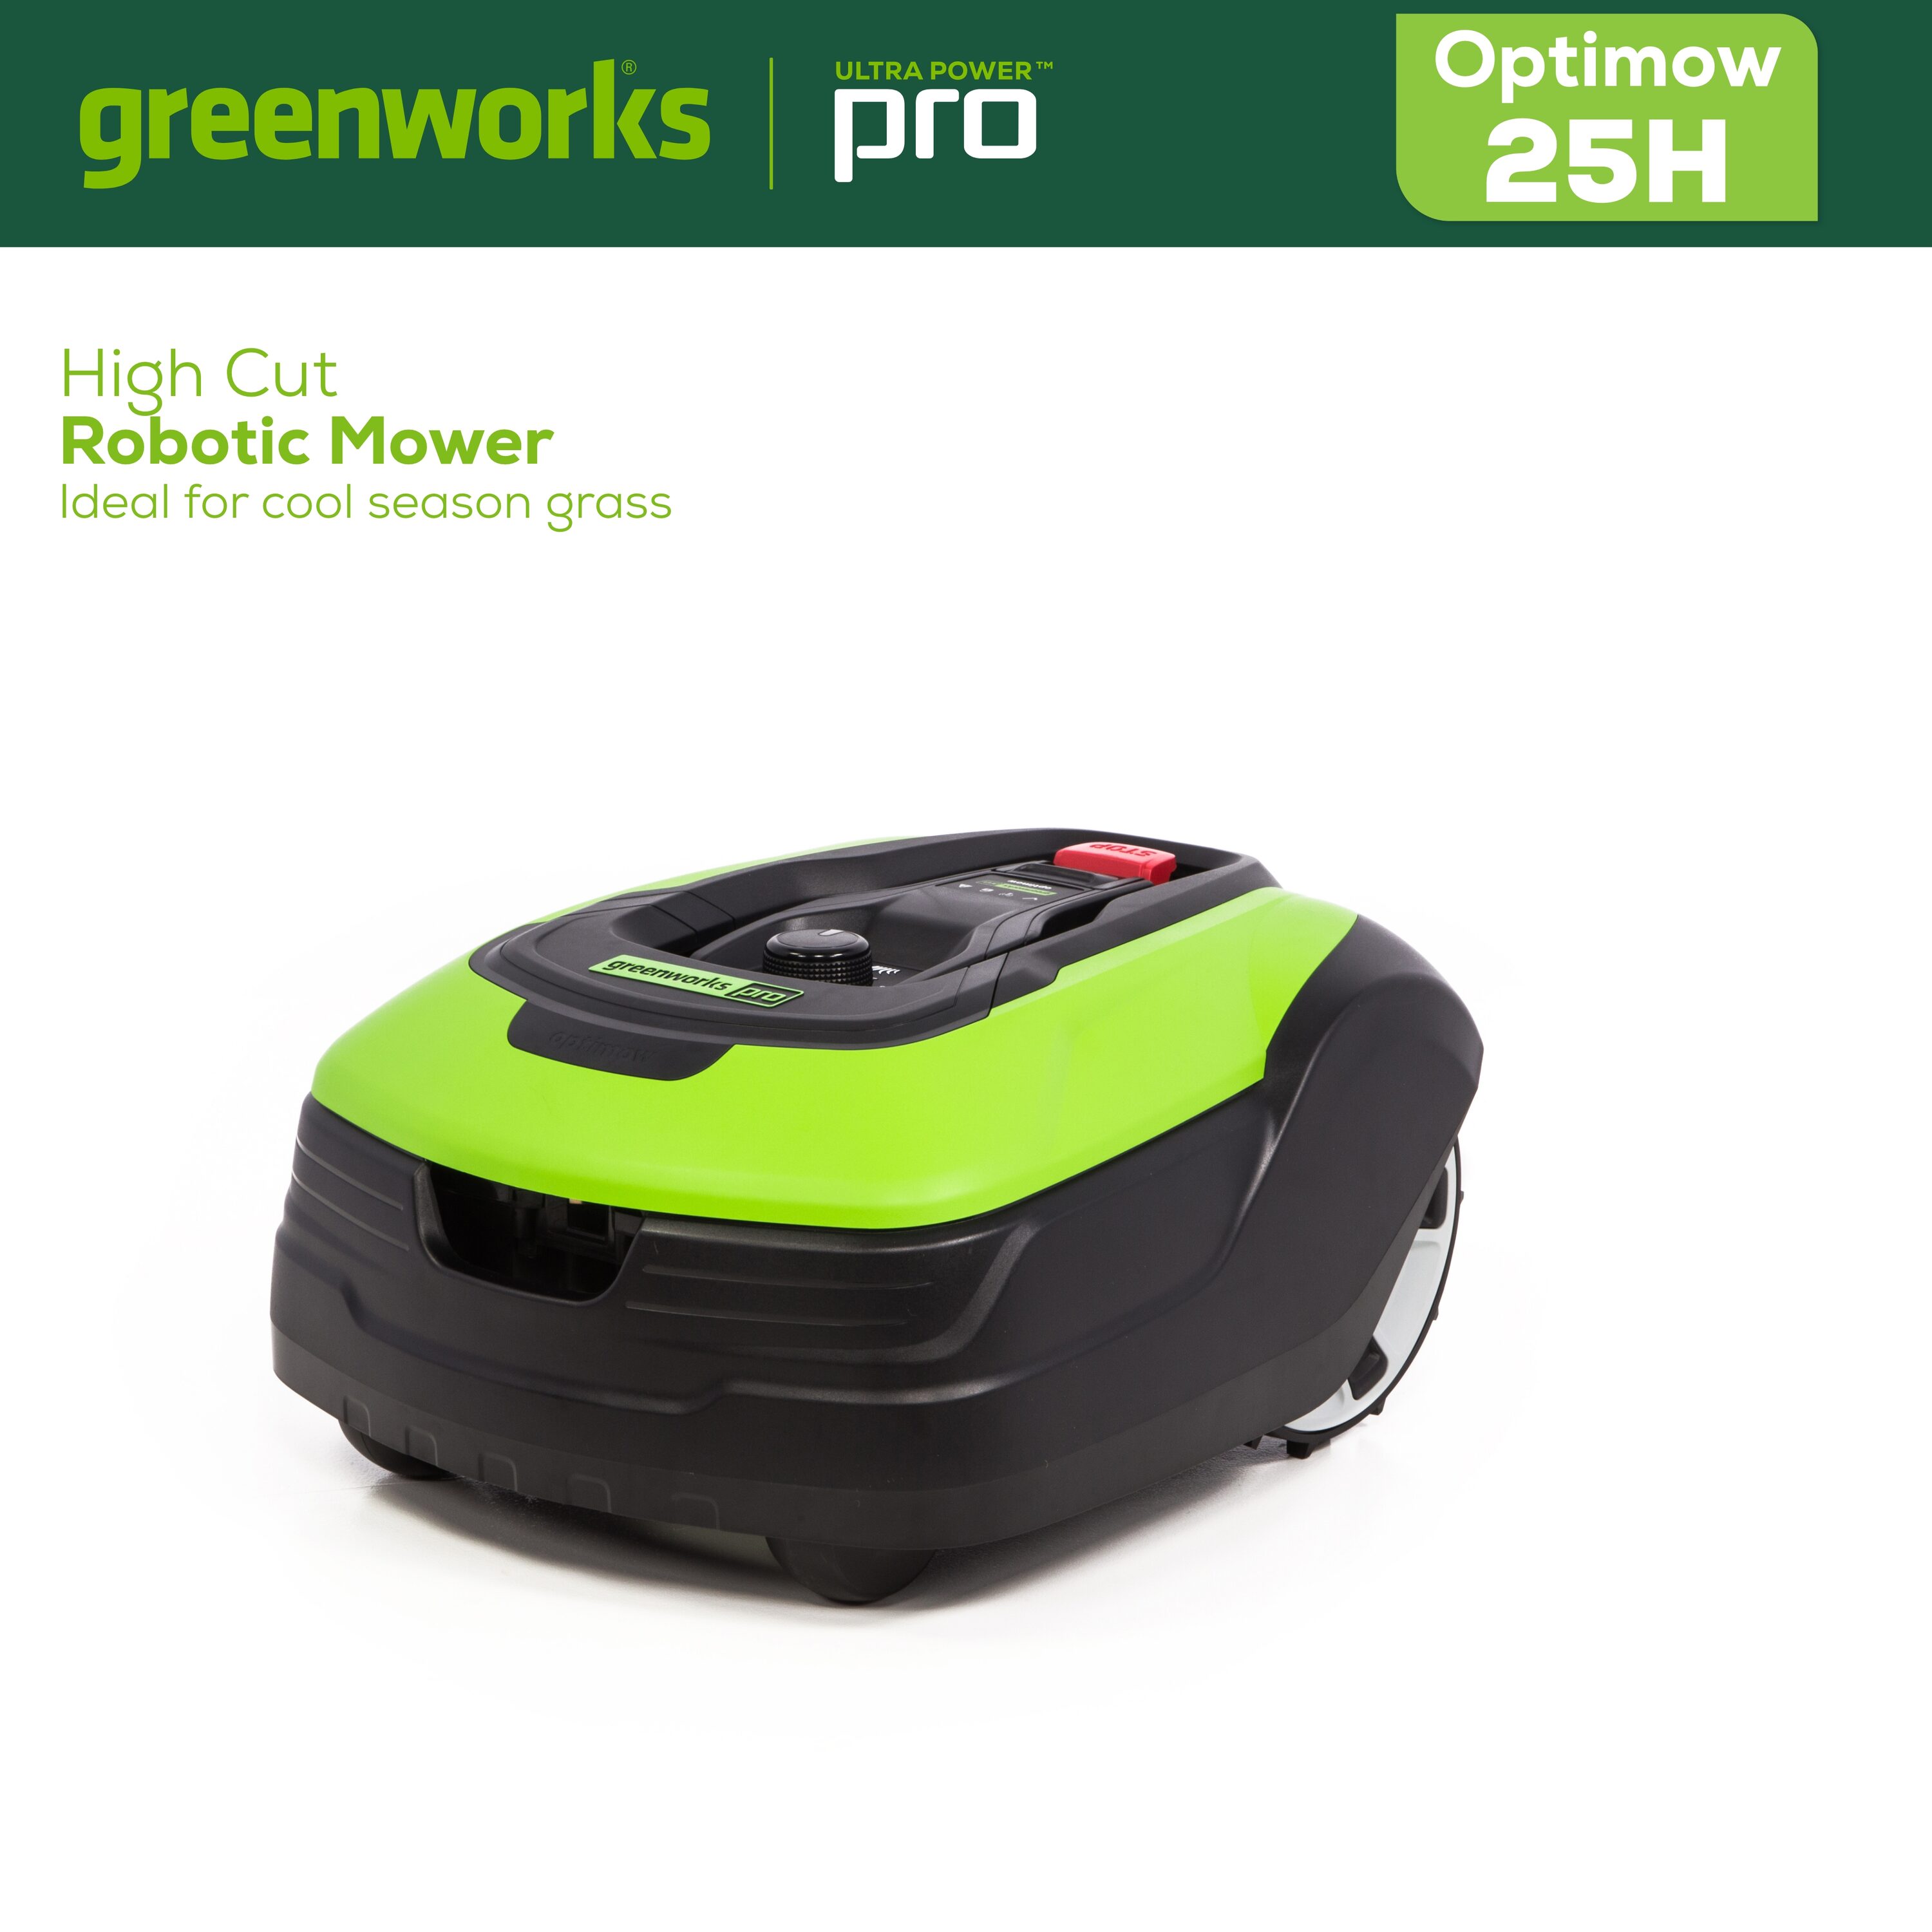 Greenworks OPTIMOW 25H